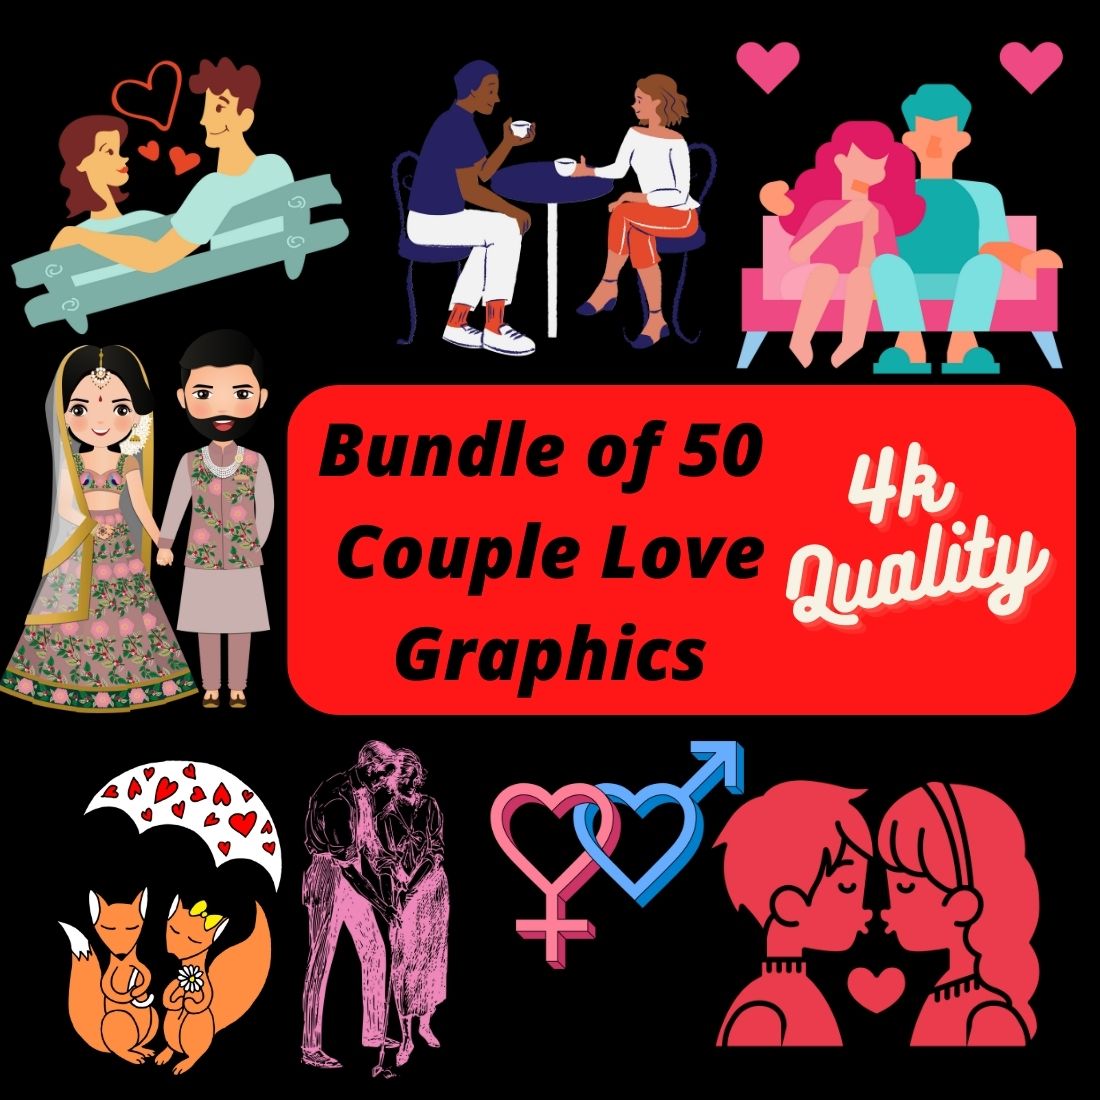 Couple Love Graphics - Bundle of 50 image cover.